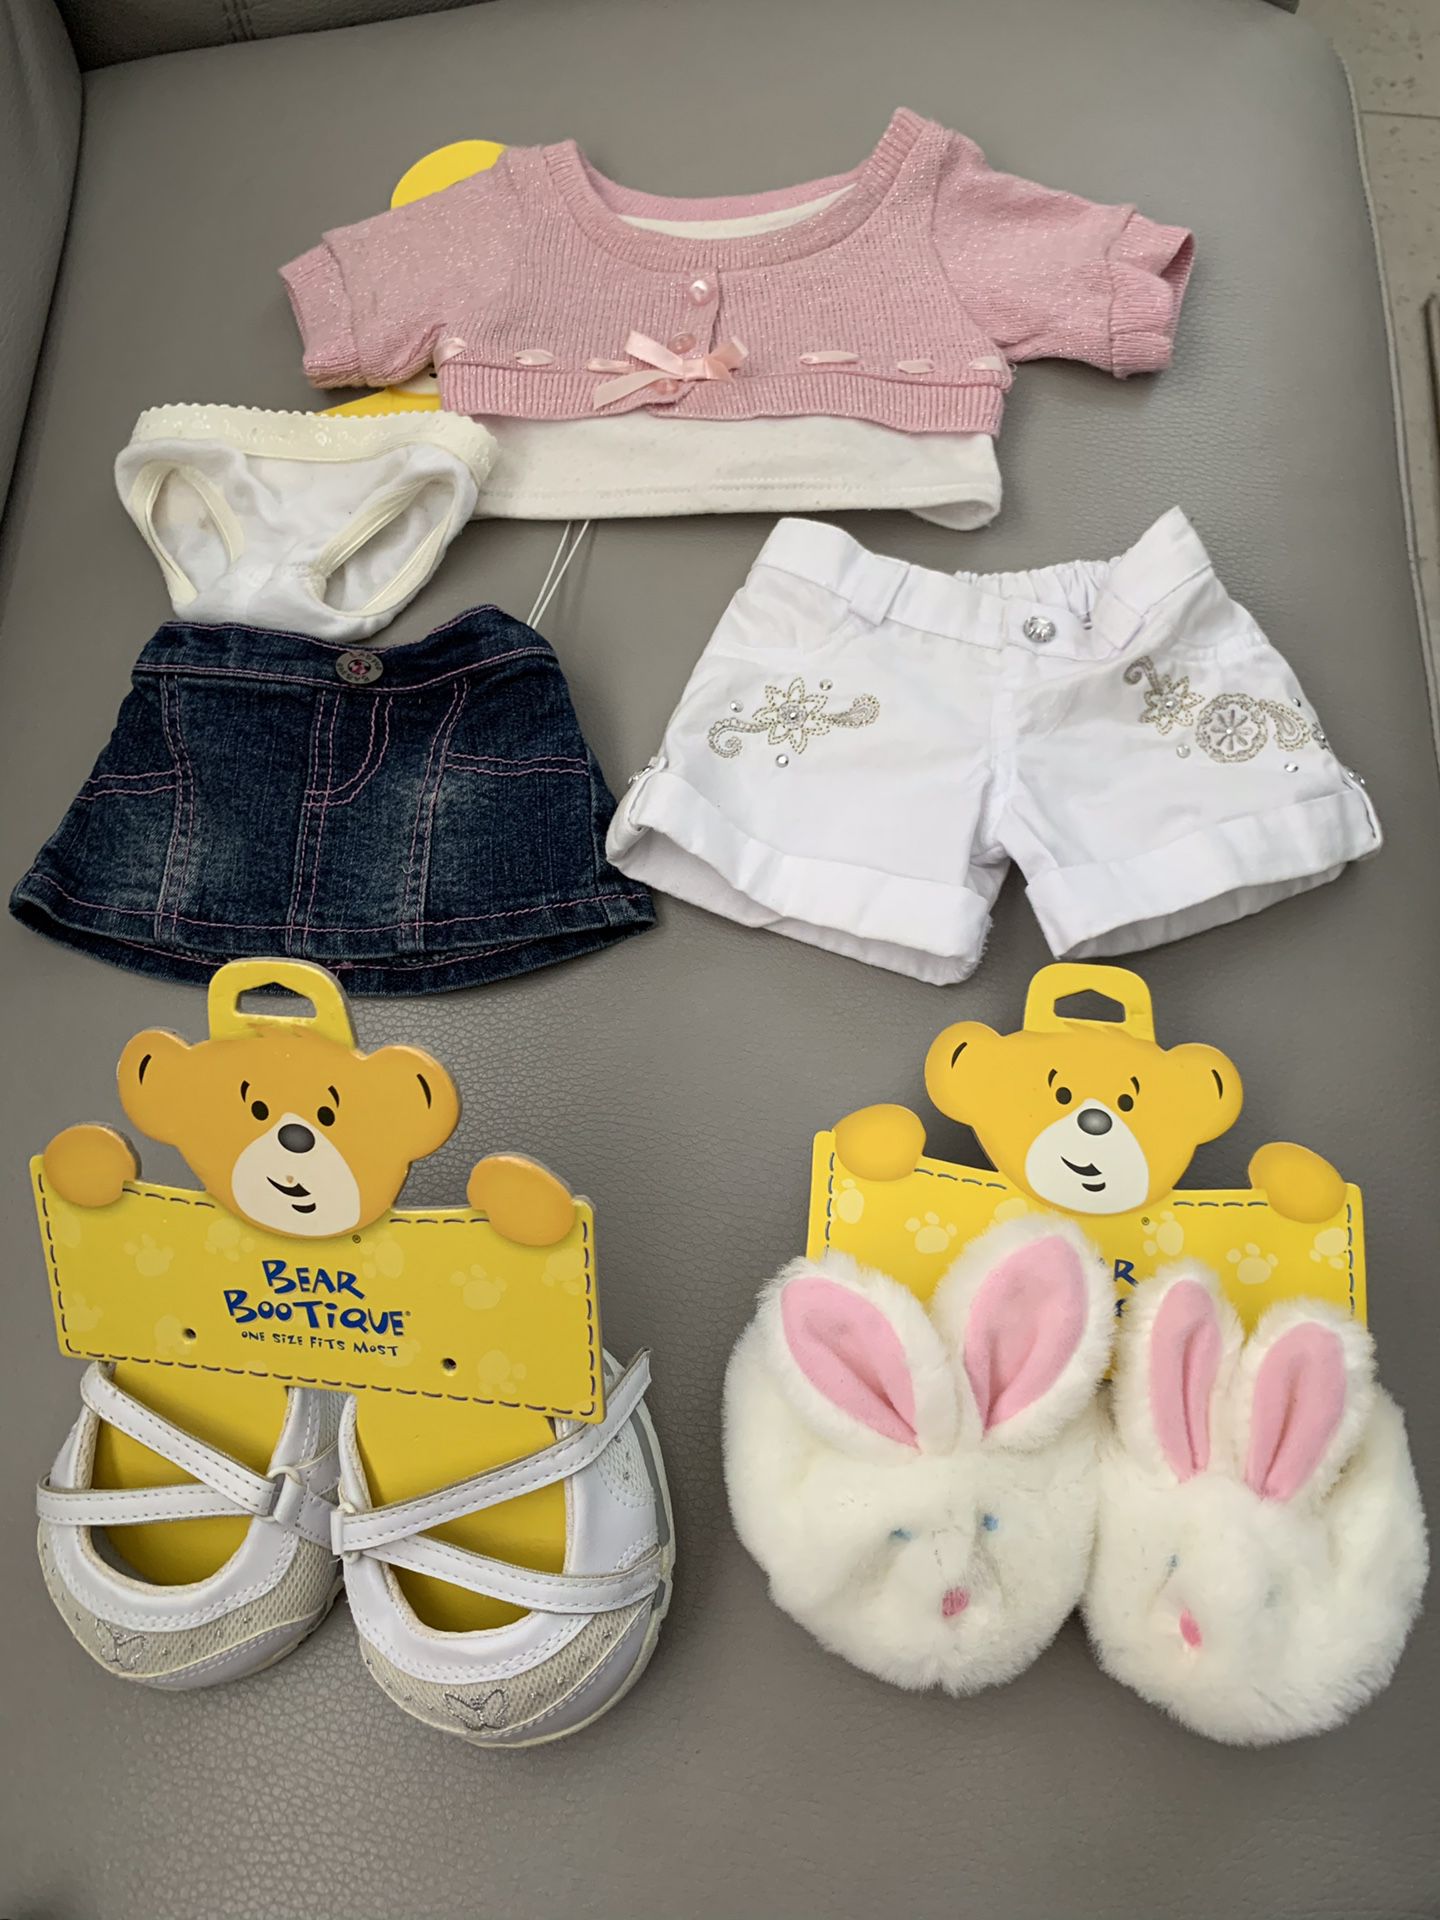 Build a Bear clothes and shoes